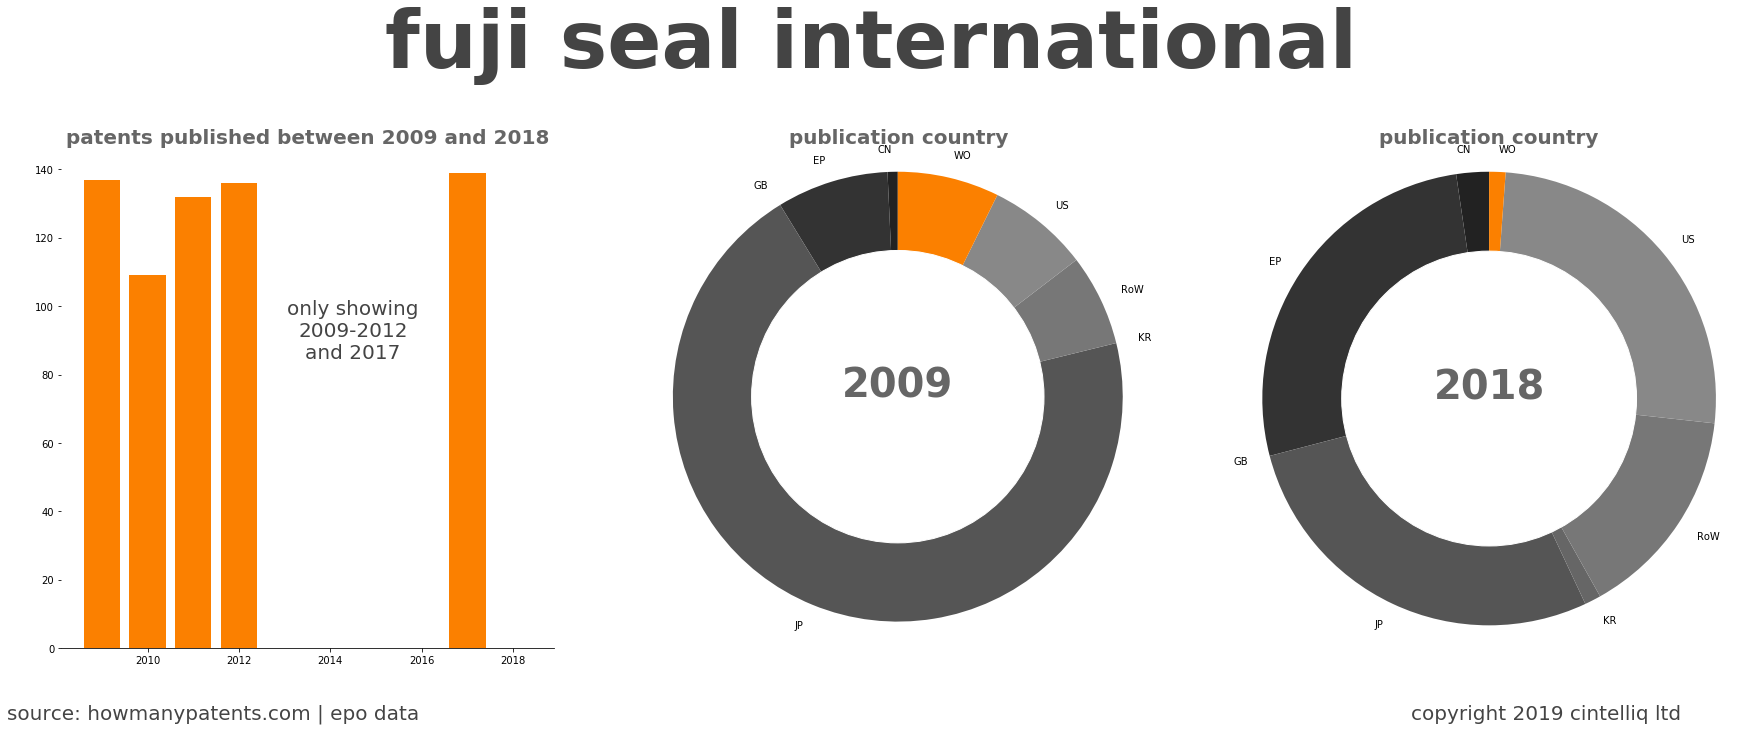 summary of patents for Fuji Seal International